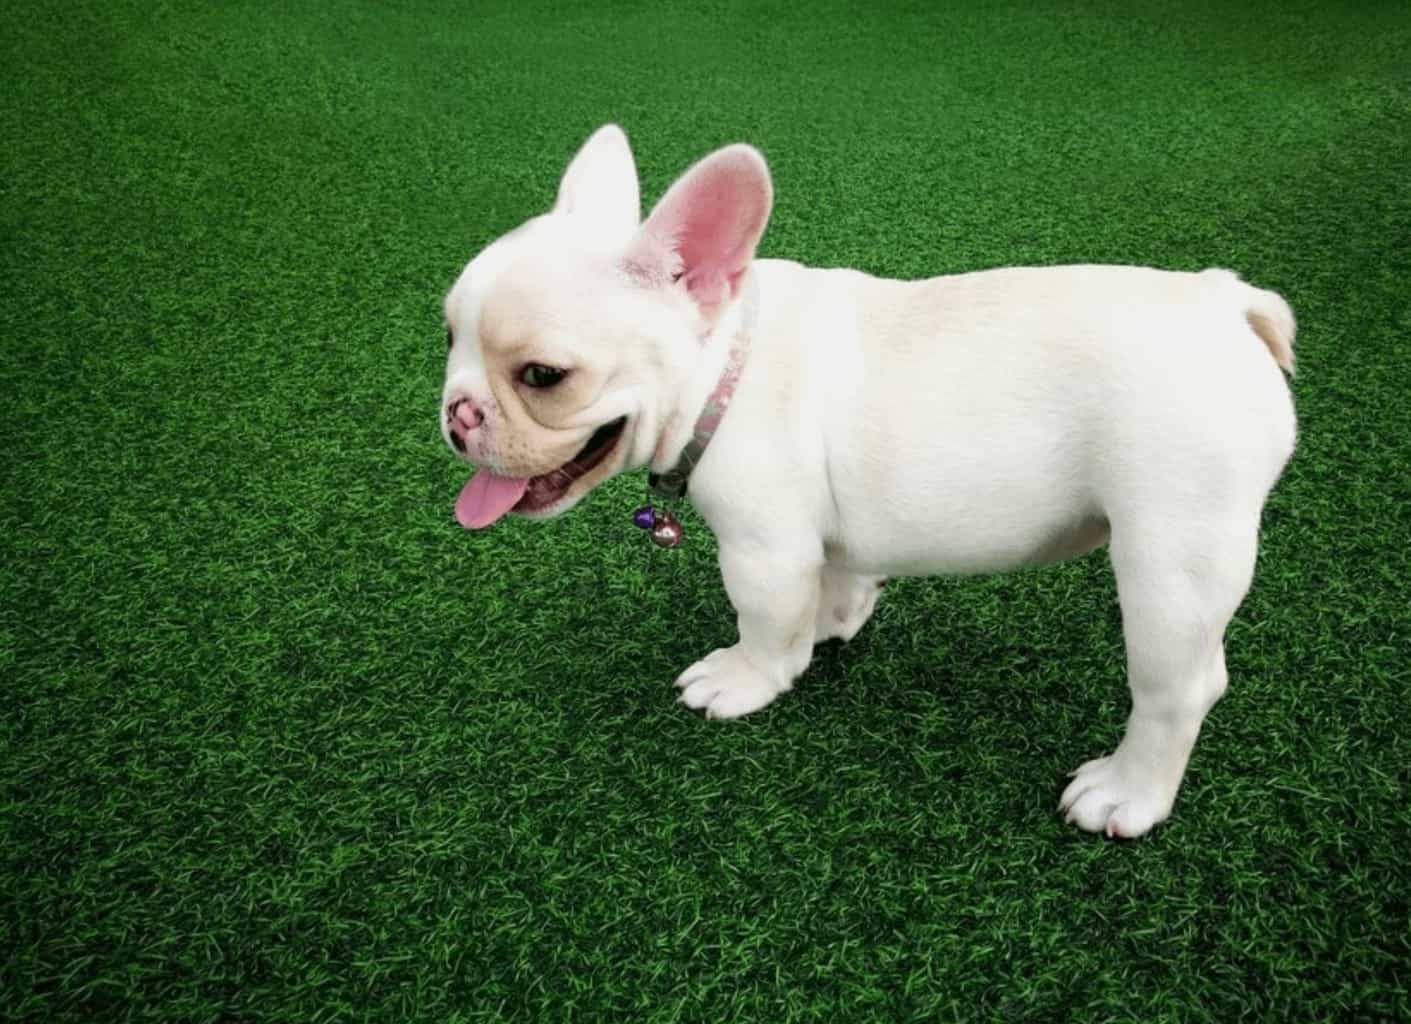 How Do You Maintain Artificial Grass When You Have Dogs? - TurFresh